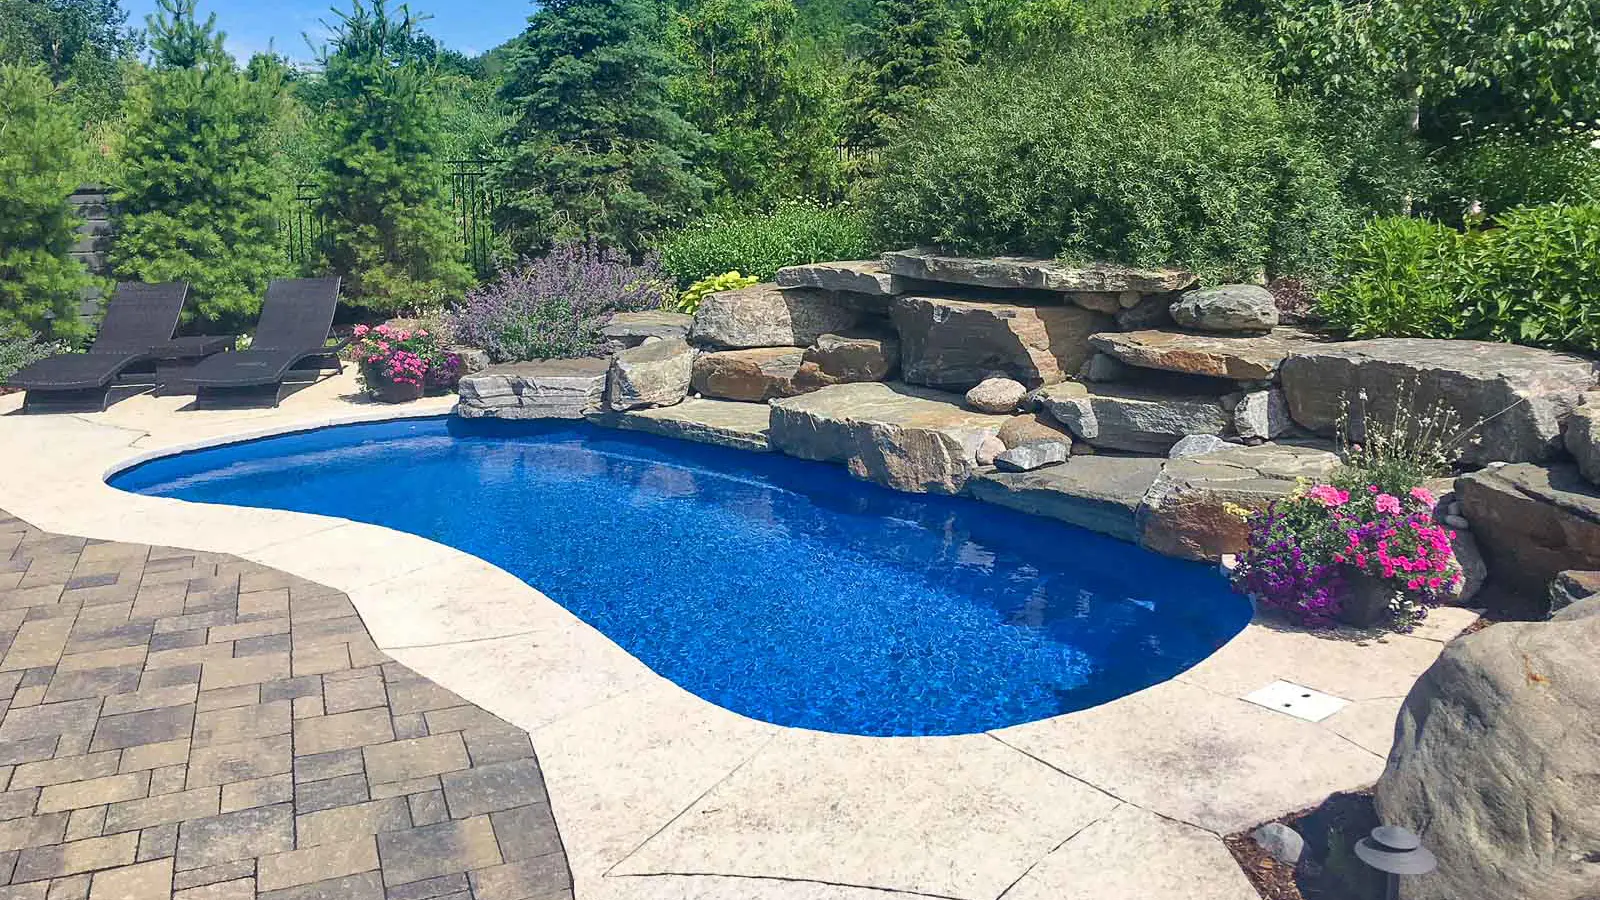 The Tuscany, a freeform fiberglass pool with carefully designed steps and curves